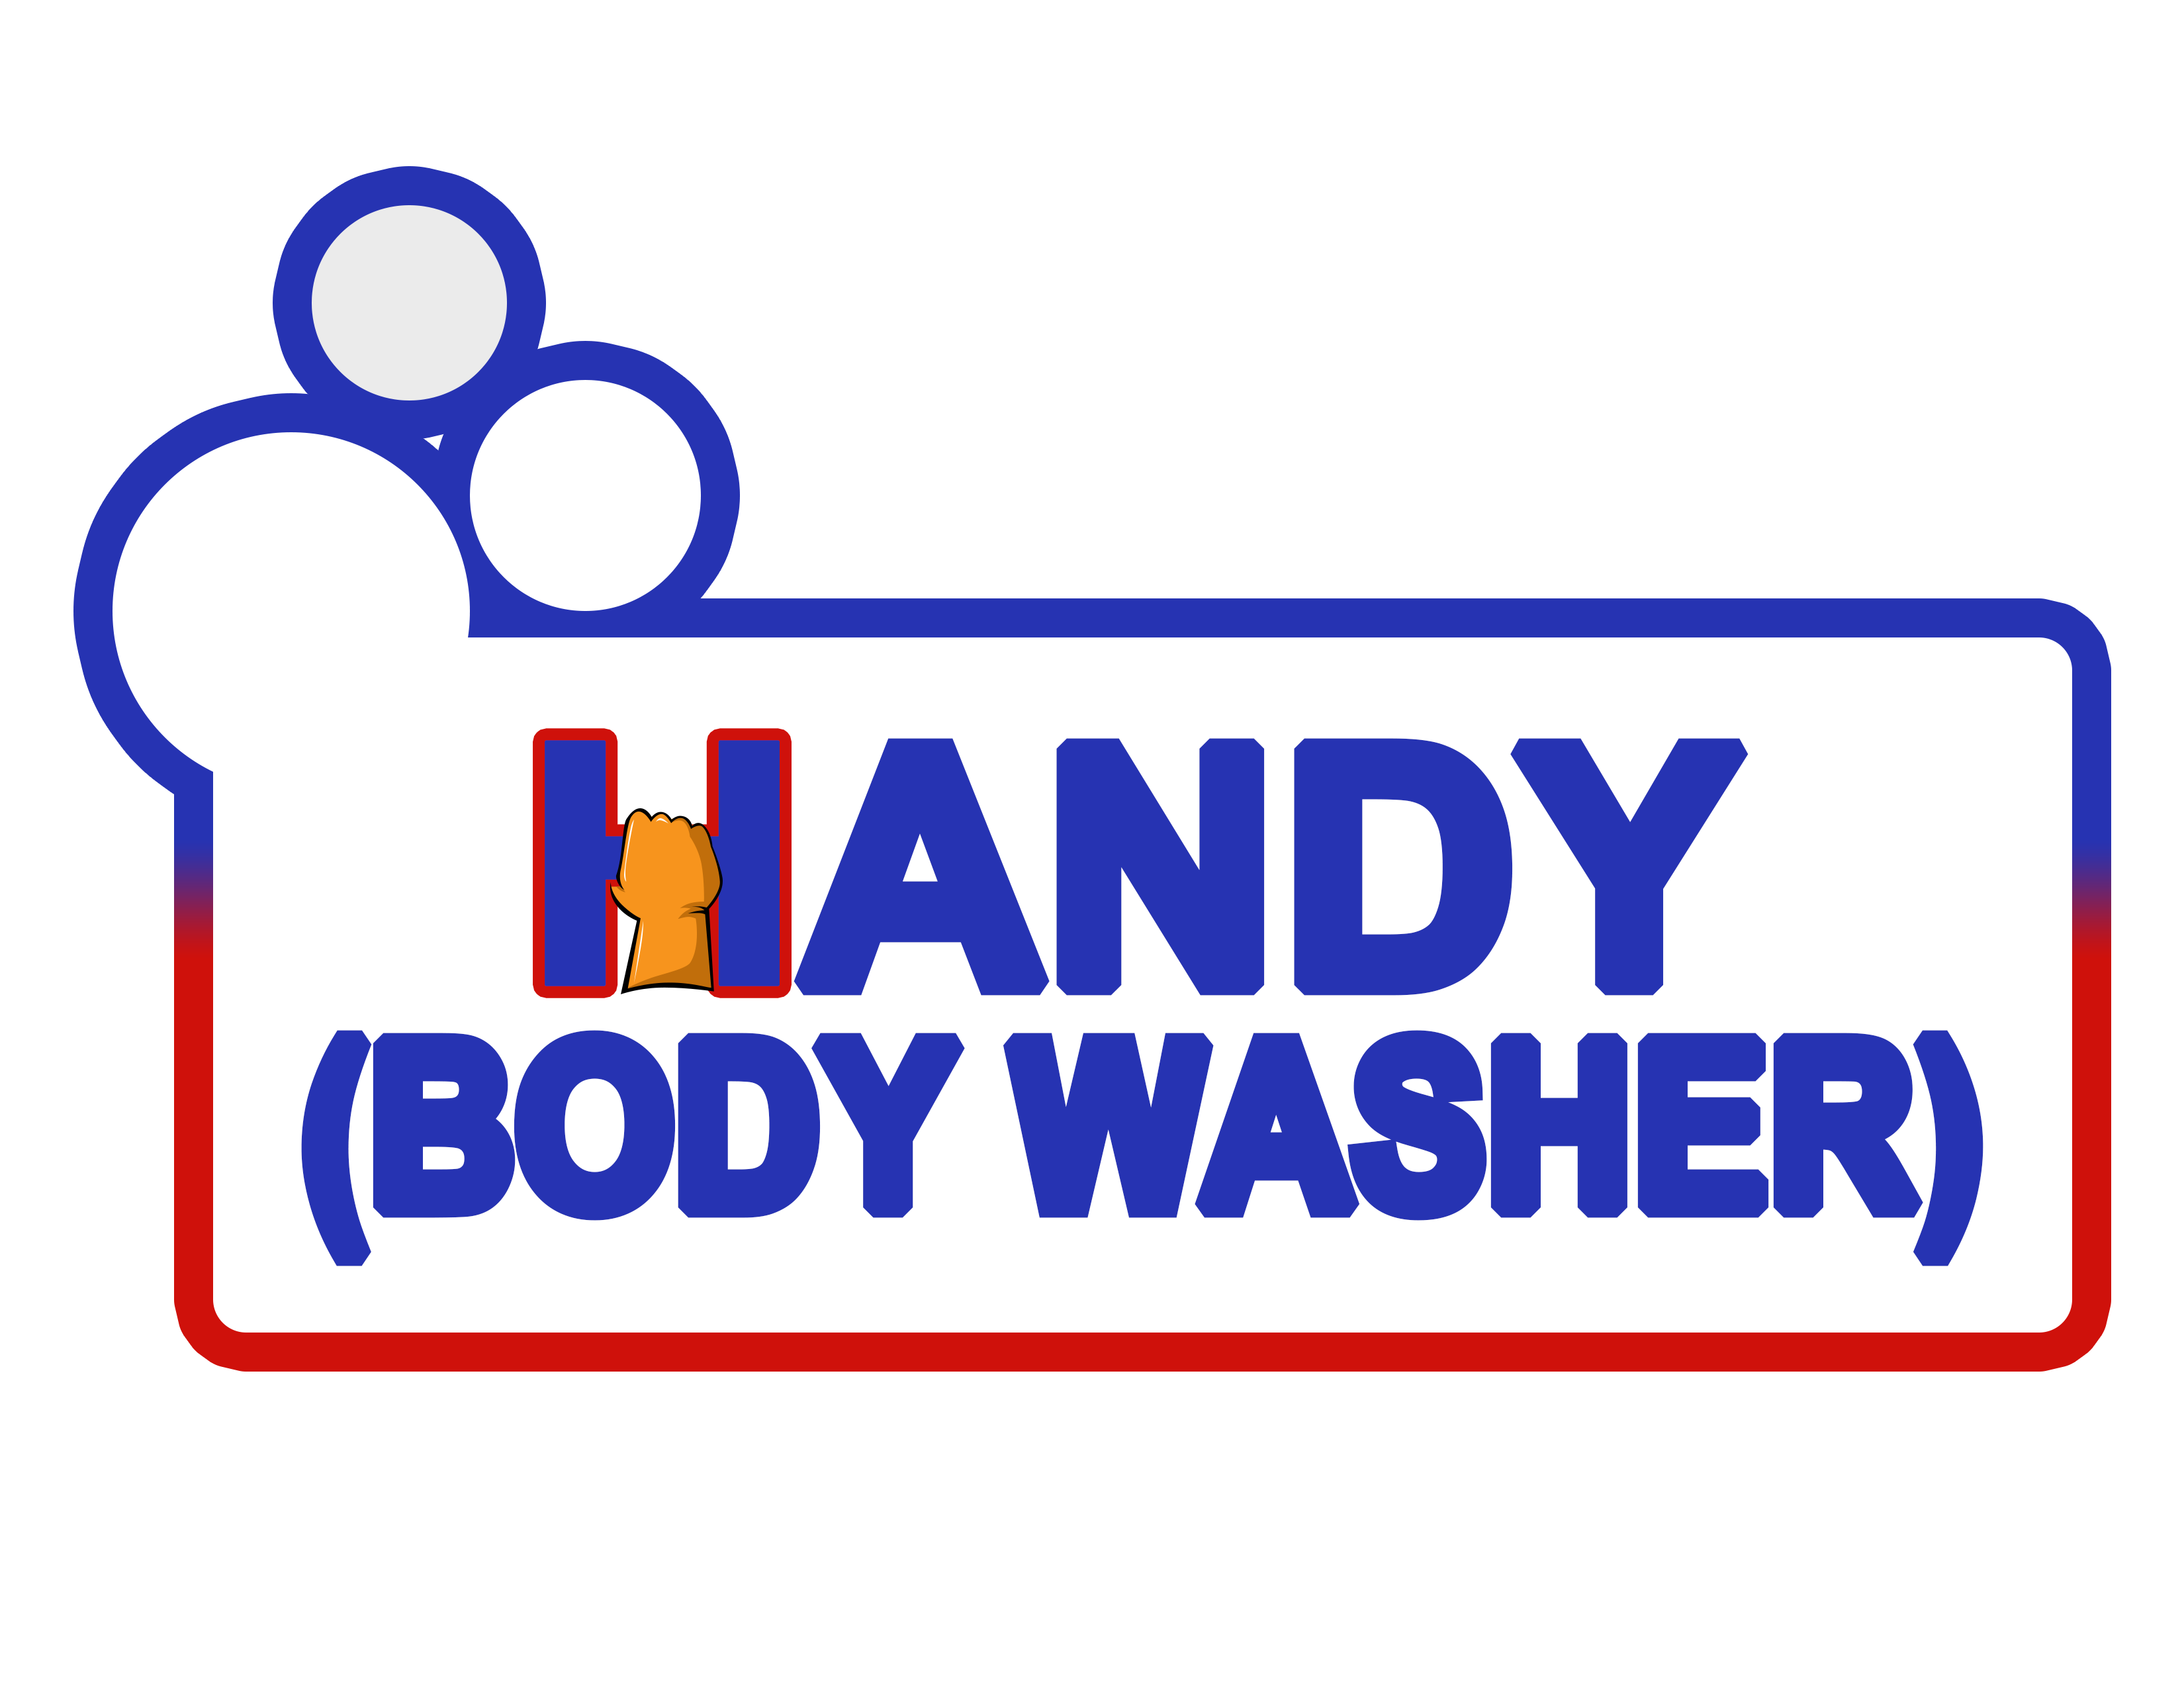 Handy Body Washer will increase the quality and enjoyment of your bath/shower time